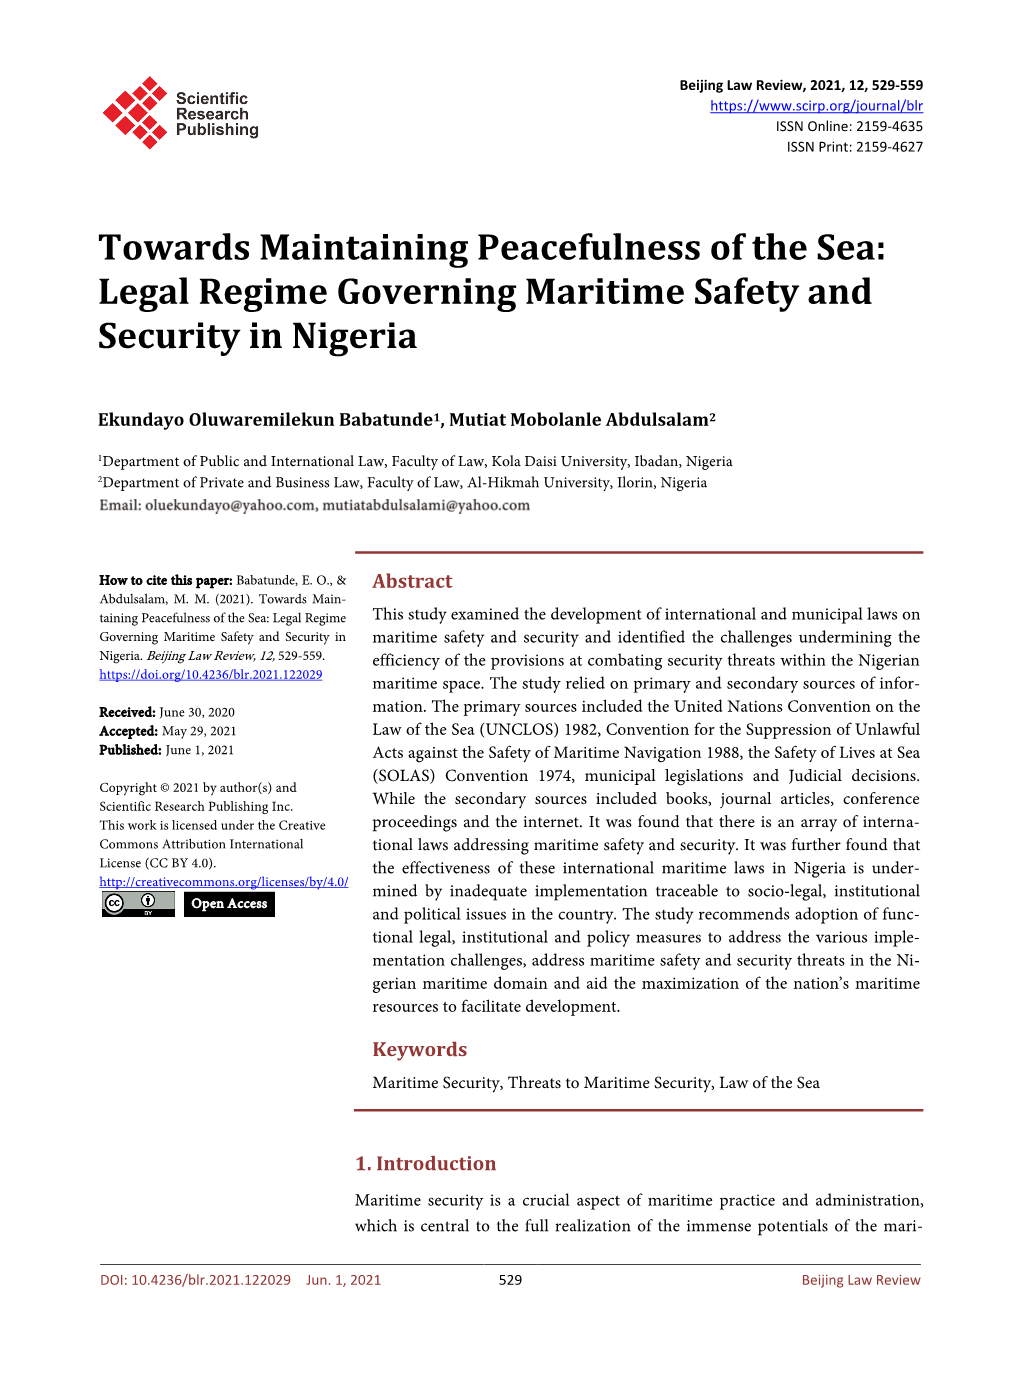 Legal Regime Governing Maritime Safety and Security in Nigeria